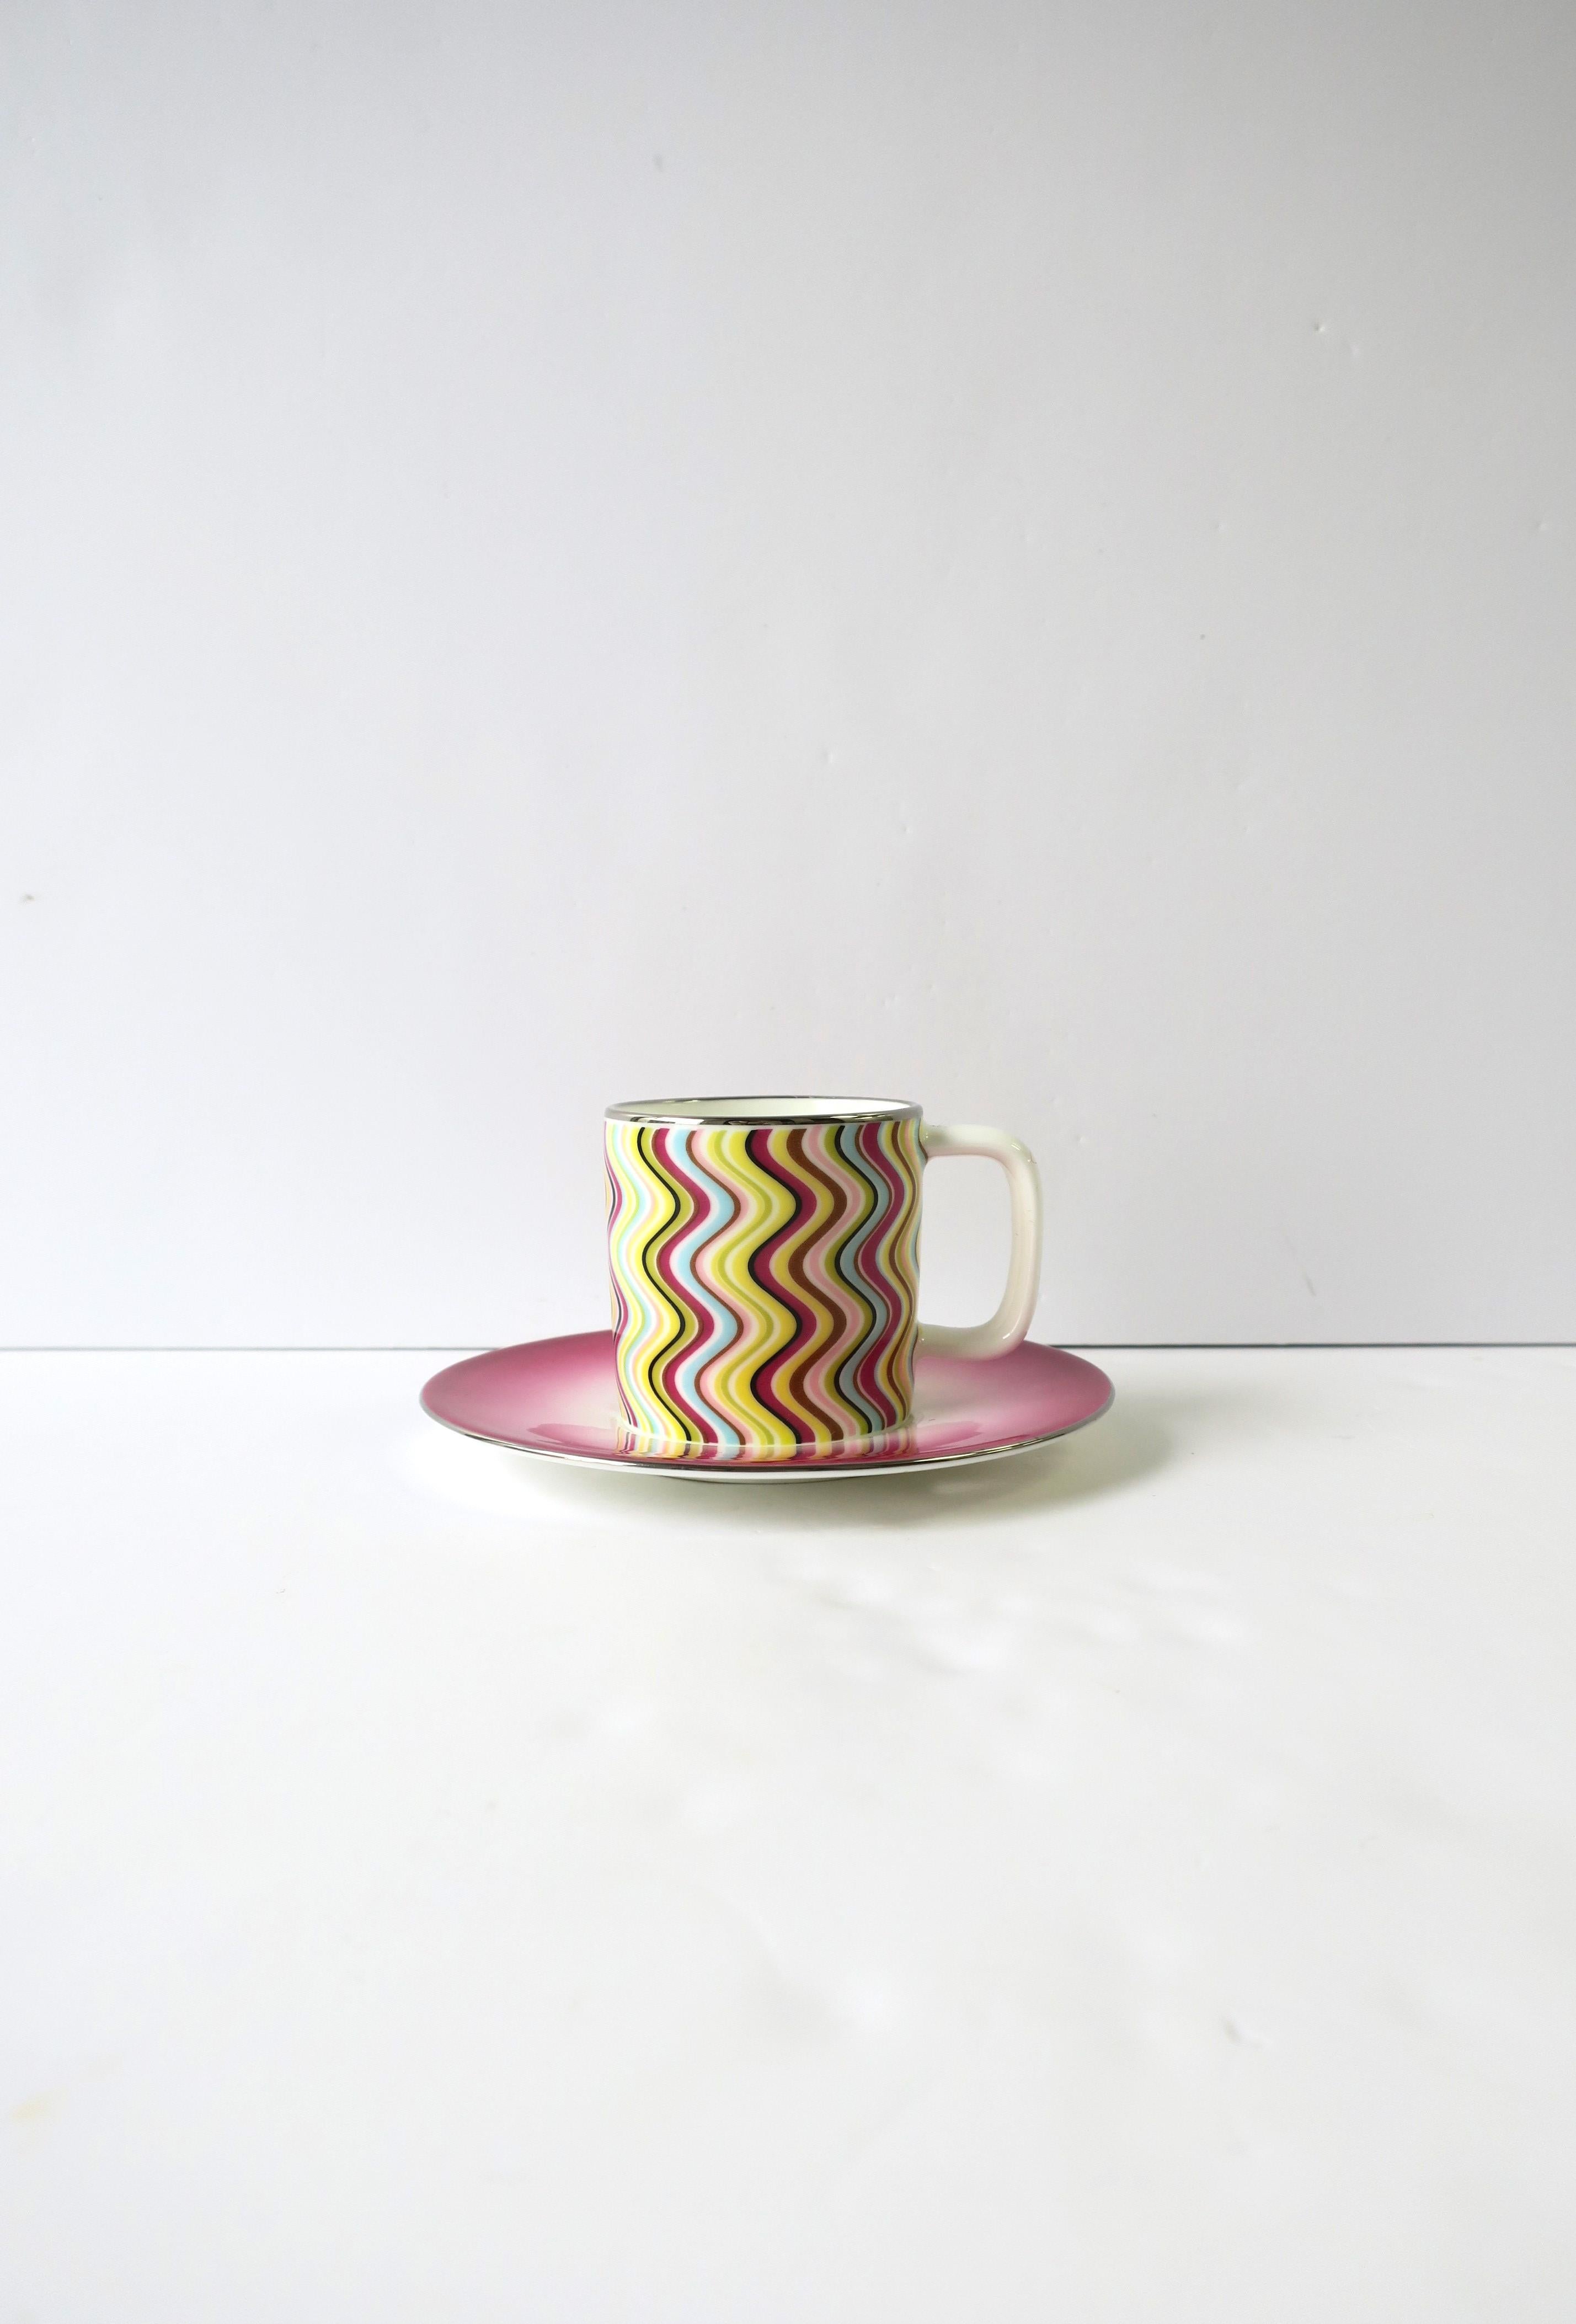 A beautiful colorful porcelain coffee espresso or demitasse tea cup and saucer from the iconic Italian luxury Maison Missoni, circa early 21st century, Italy. Colors include white porcelain, yellow, pink, red raspberry, light green, light blue and